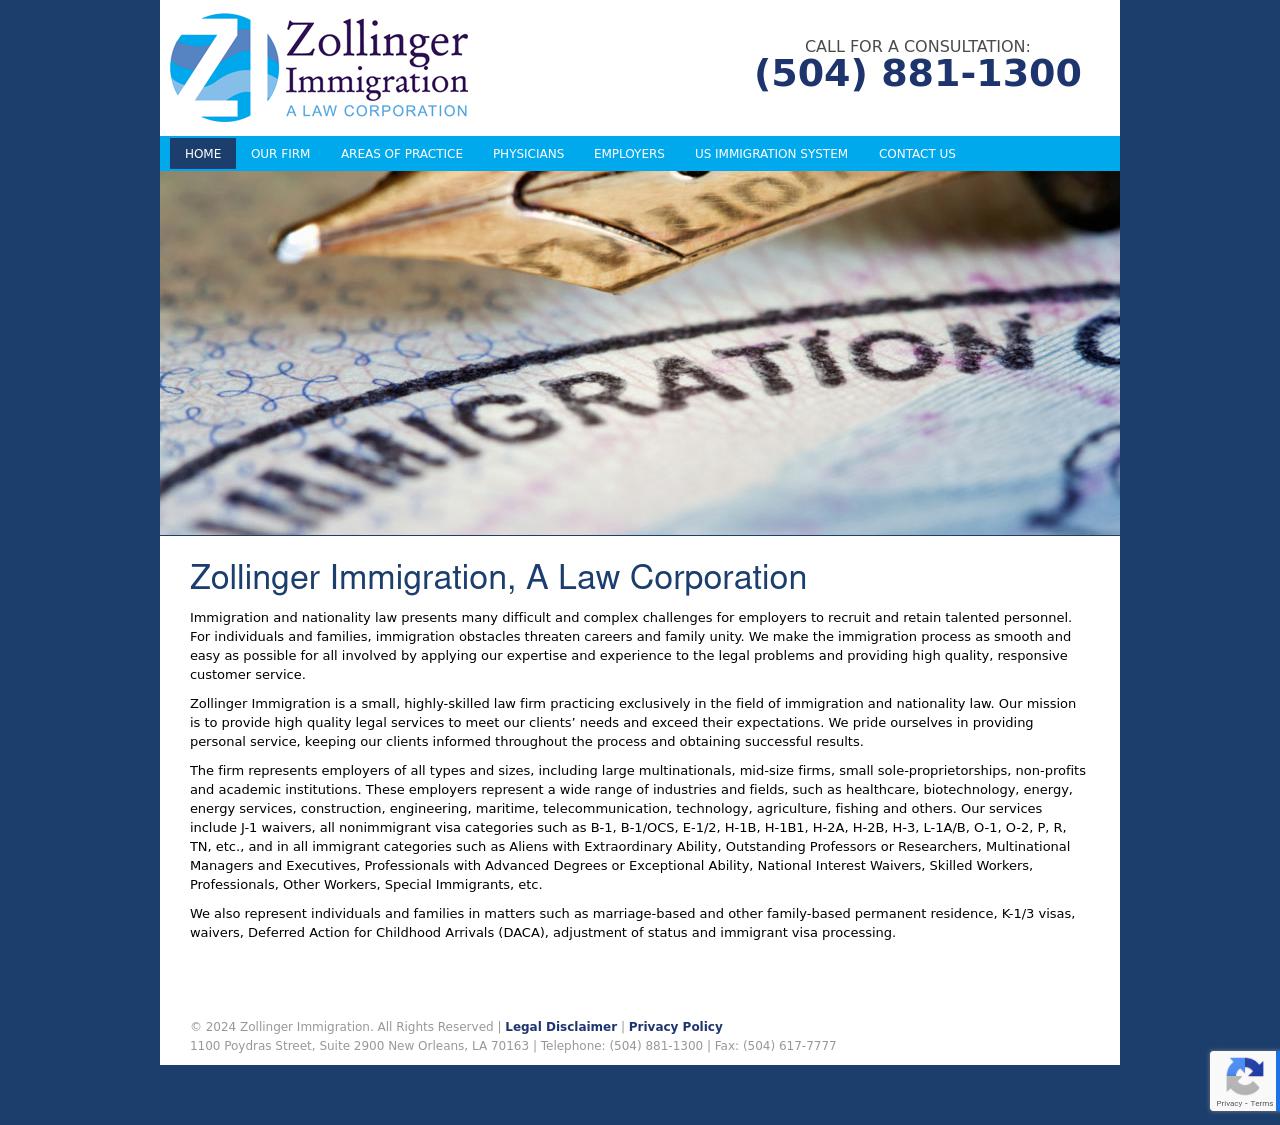 Zollinger Immigration A Law Corp - New Orleans LA Lawyers